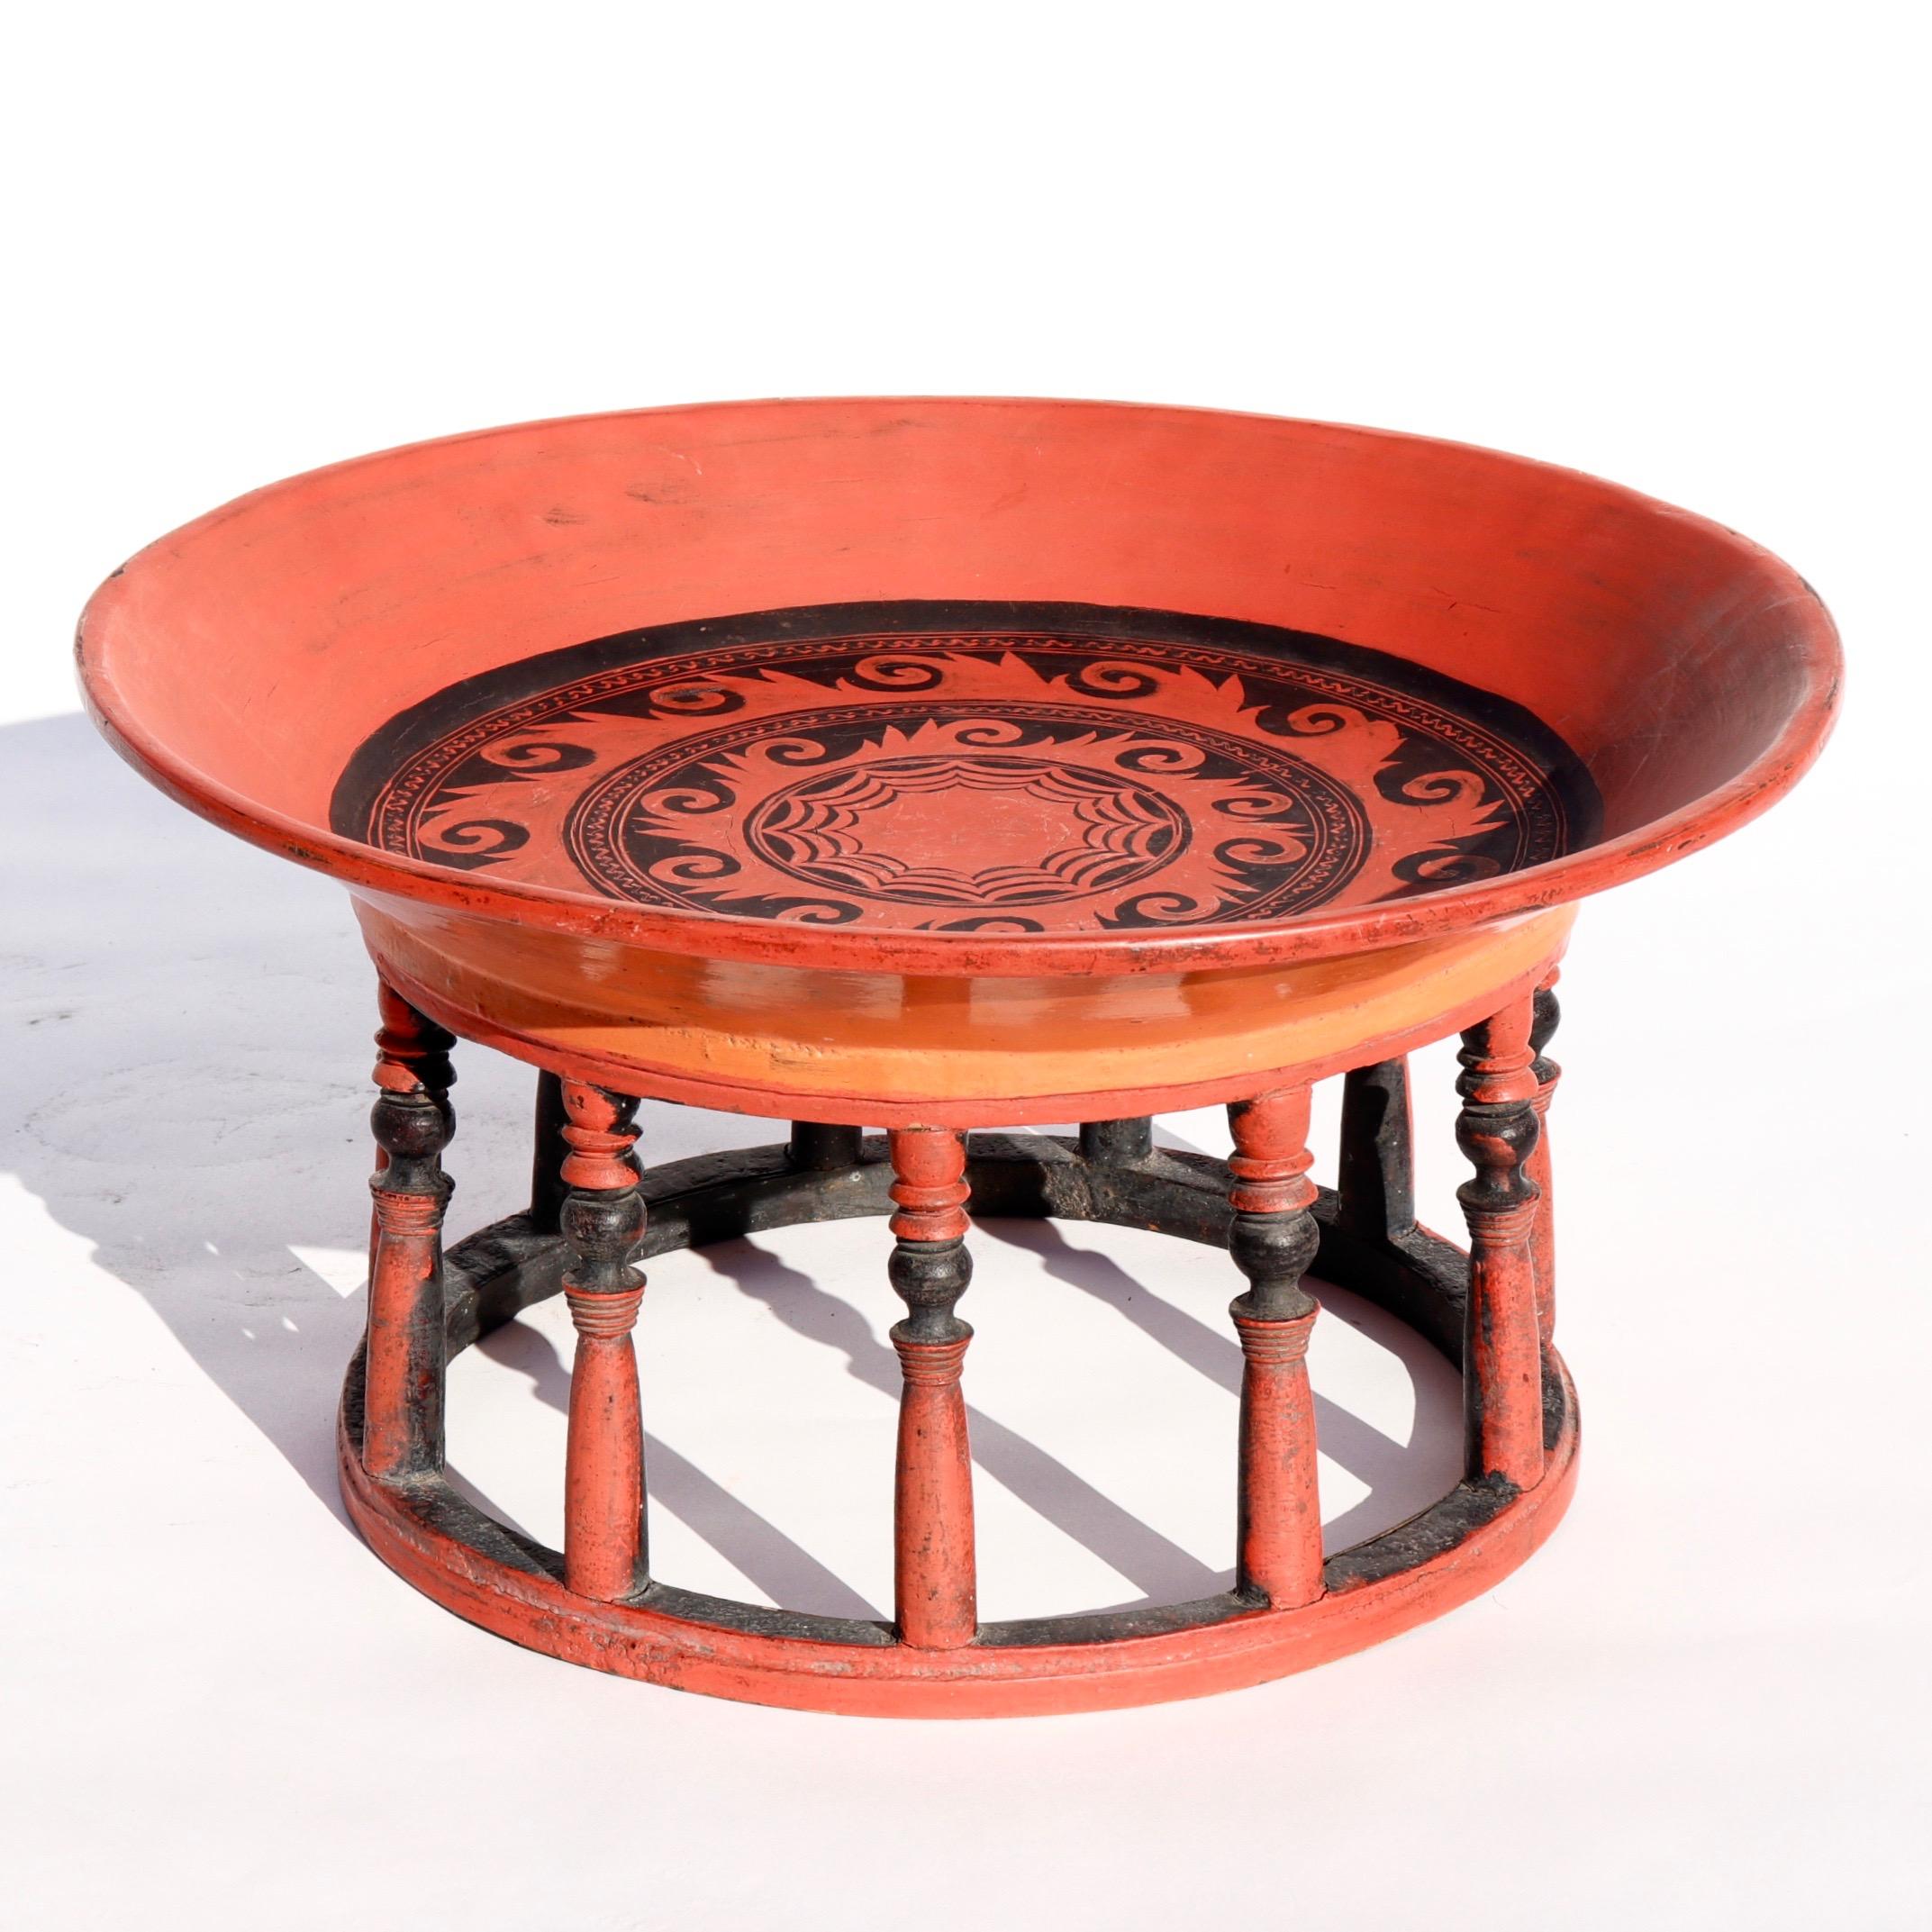 Antique Burmese kalat lacquered offering tray, Shan States, Inle Lake, circa 1920. Assembled from wood and rattan covered in red, orange and black lacquer. A simple circular form with 11 turned spindle uprights and broad rimed woven tray with